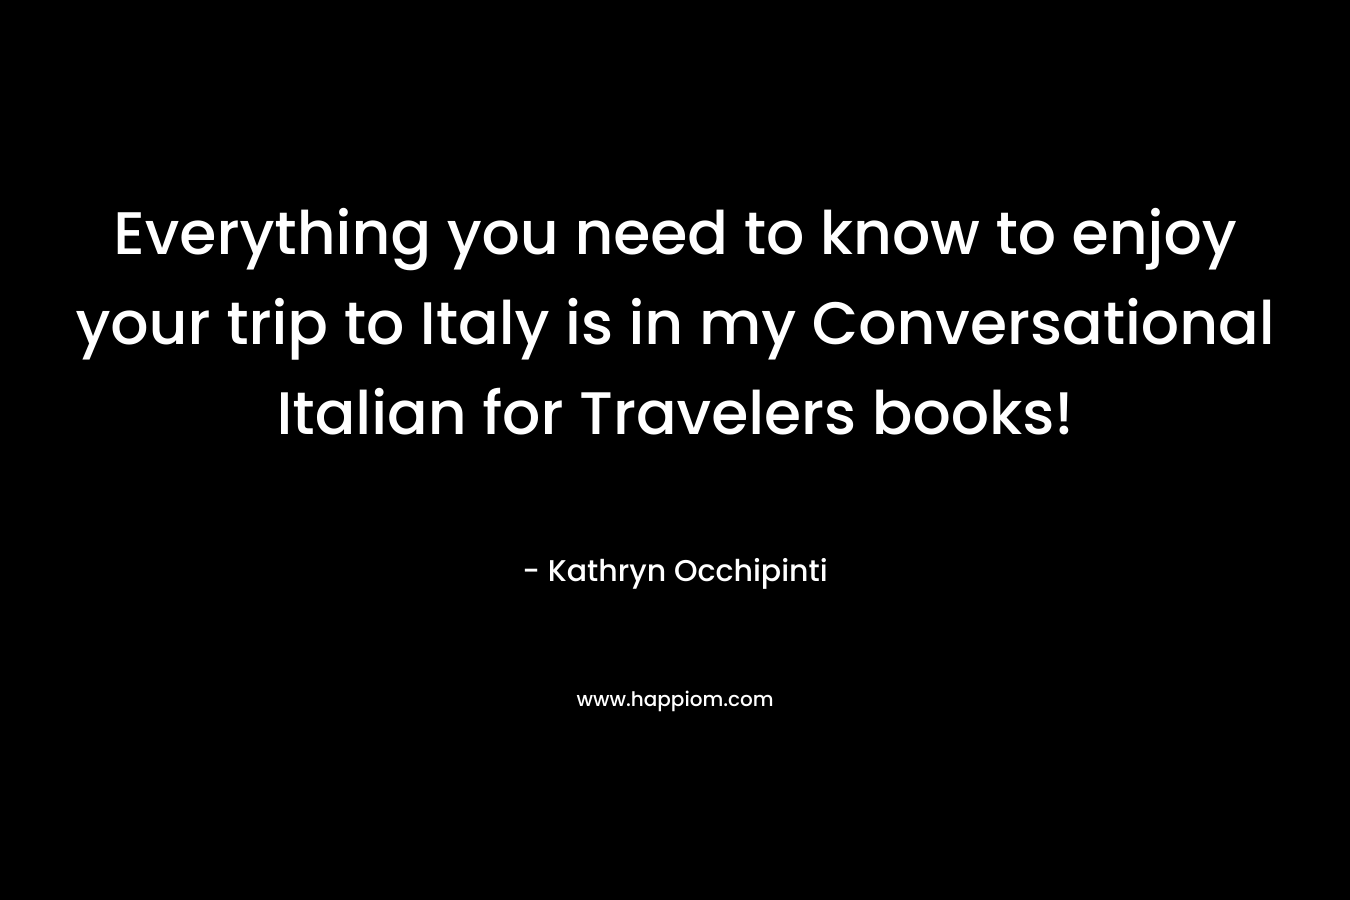 Everything you need to know to enjoy your trip to Italy is in my Conversational Italian for Travelers books!